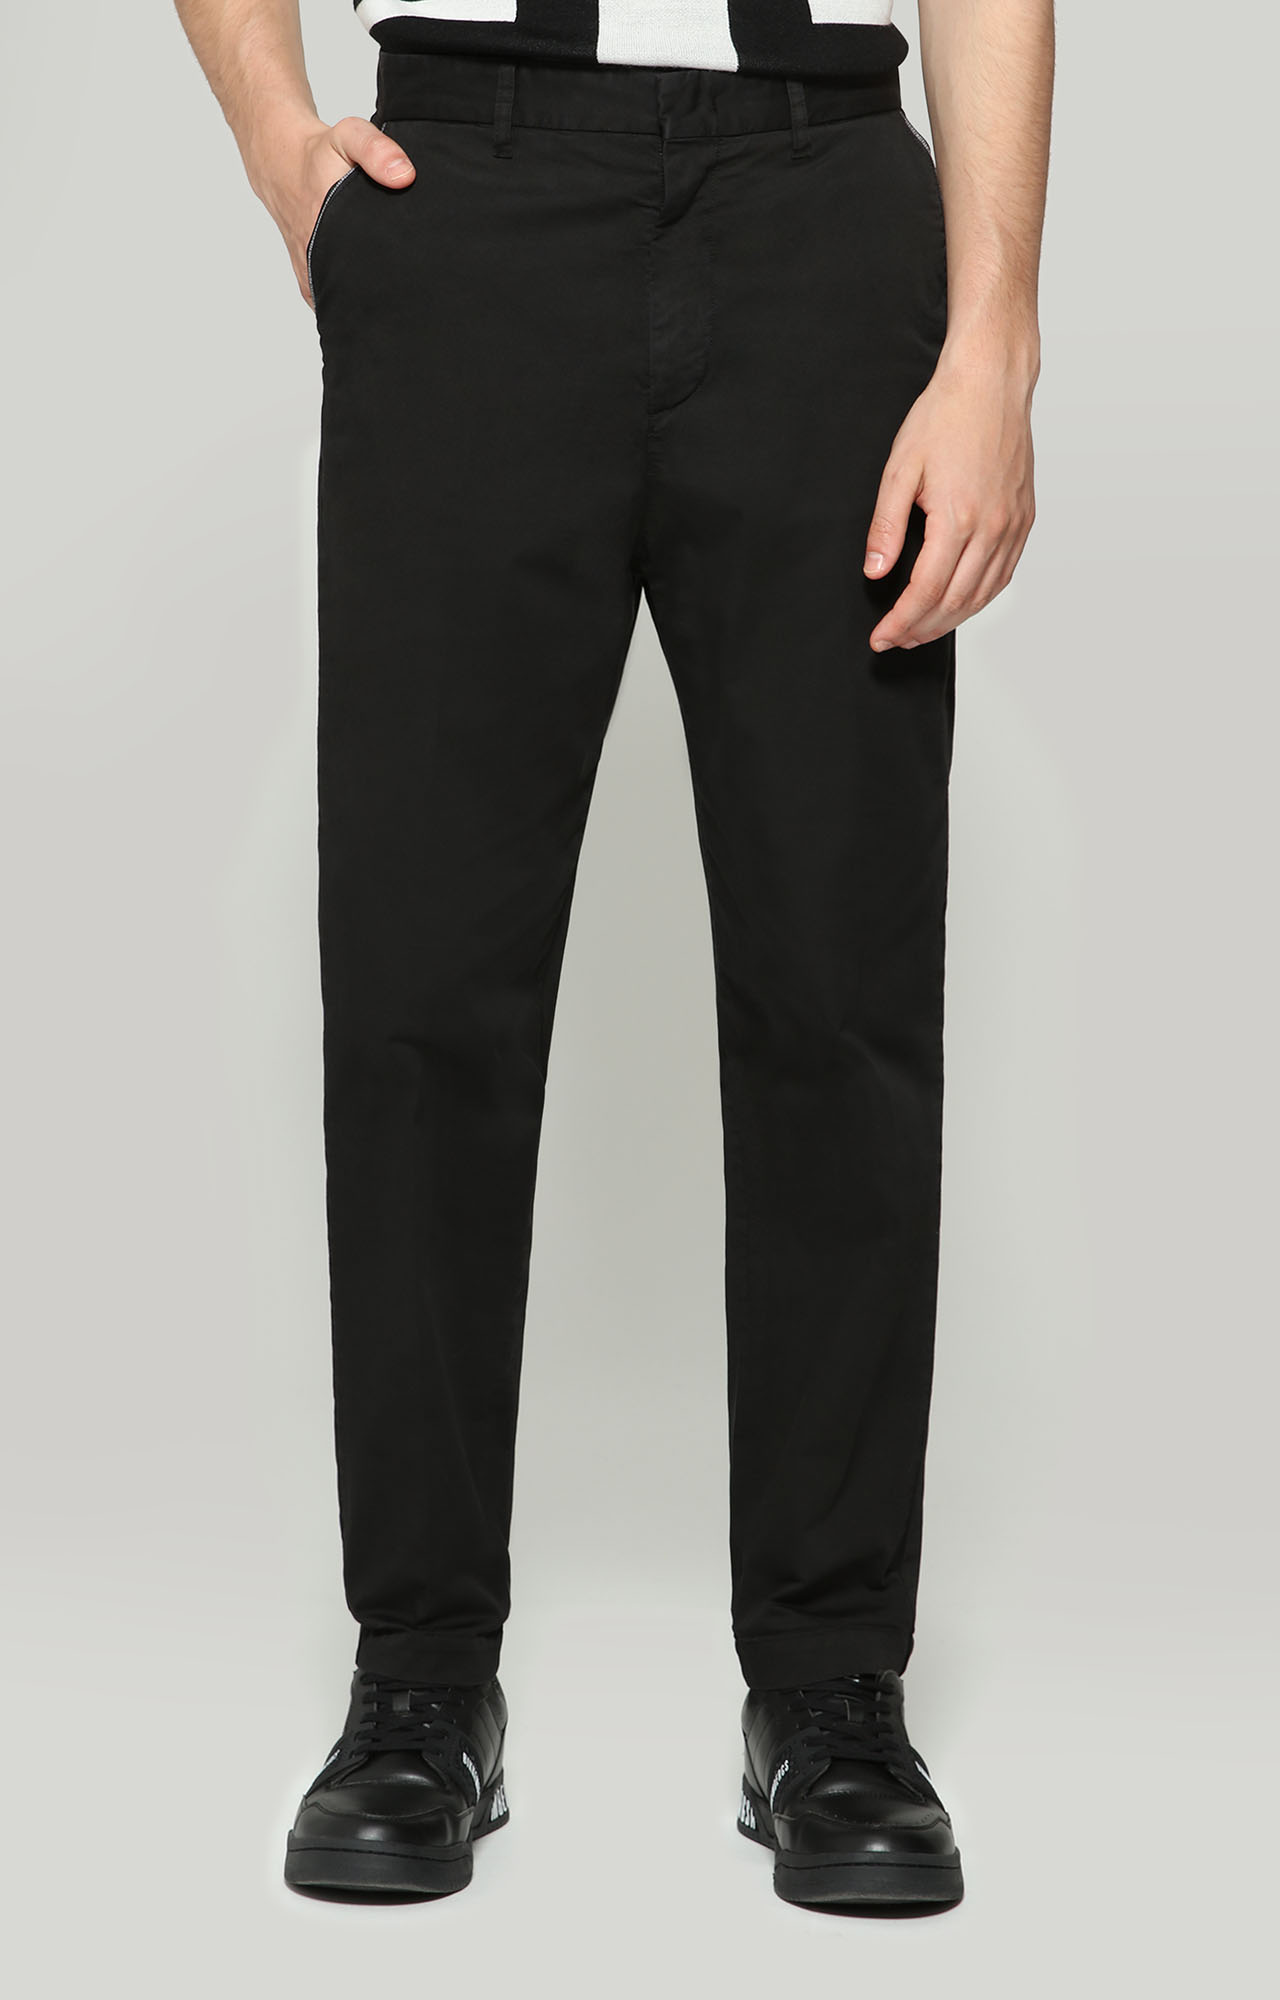 TROUSERS G/D WITH LOGO TAPE, NERO, hi-res-1